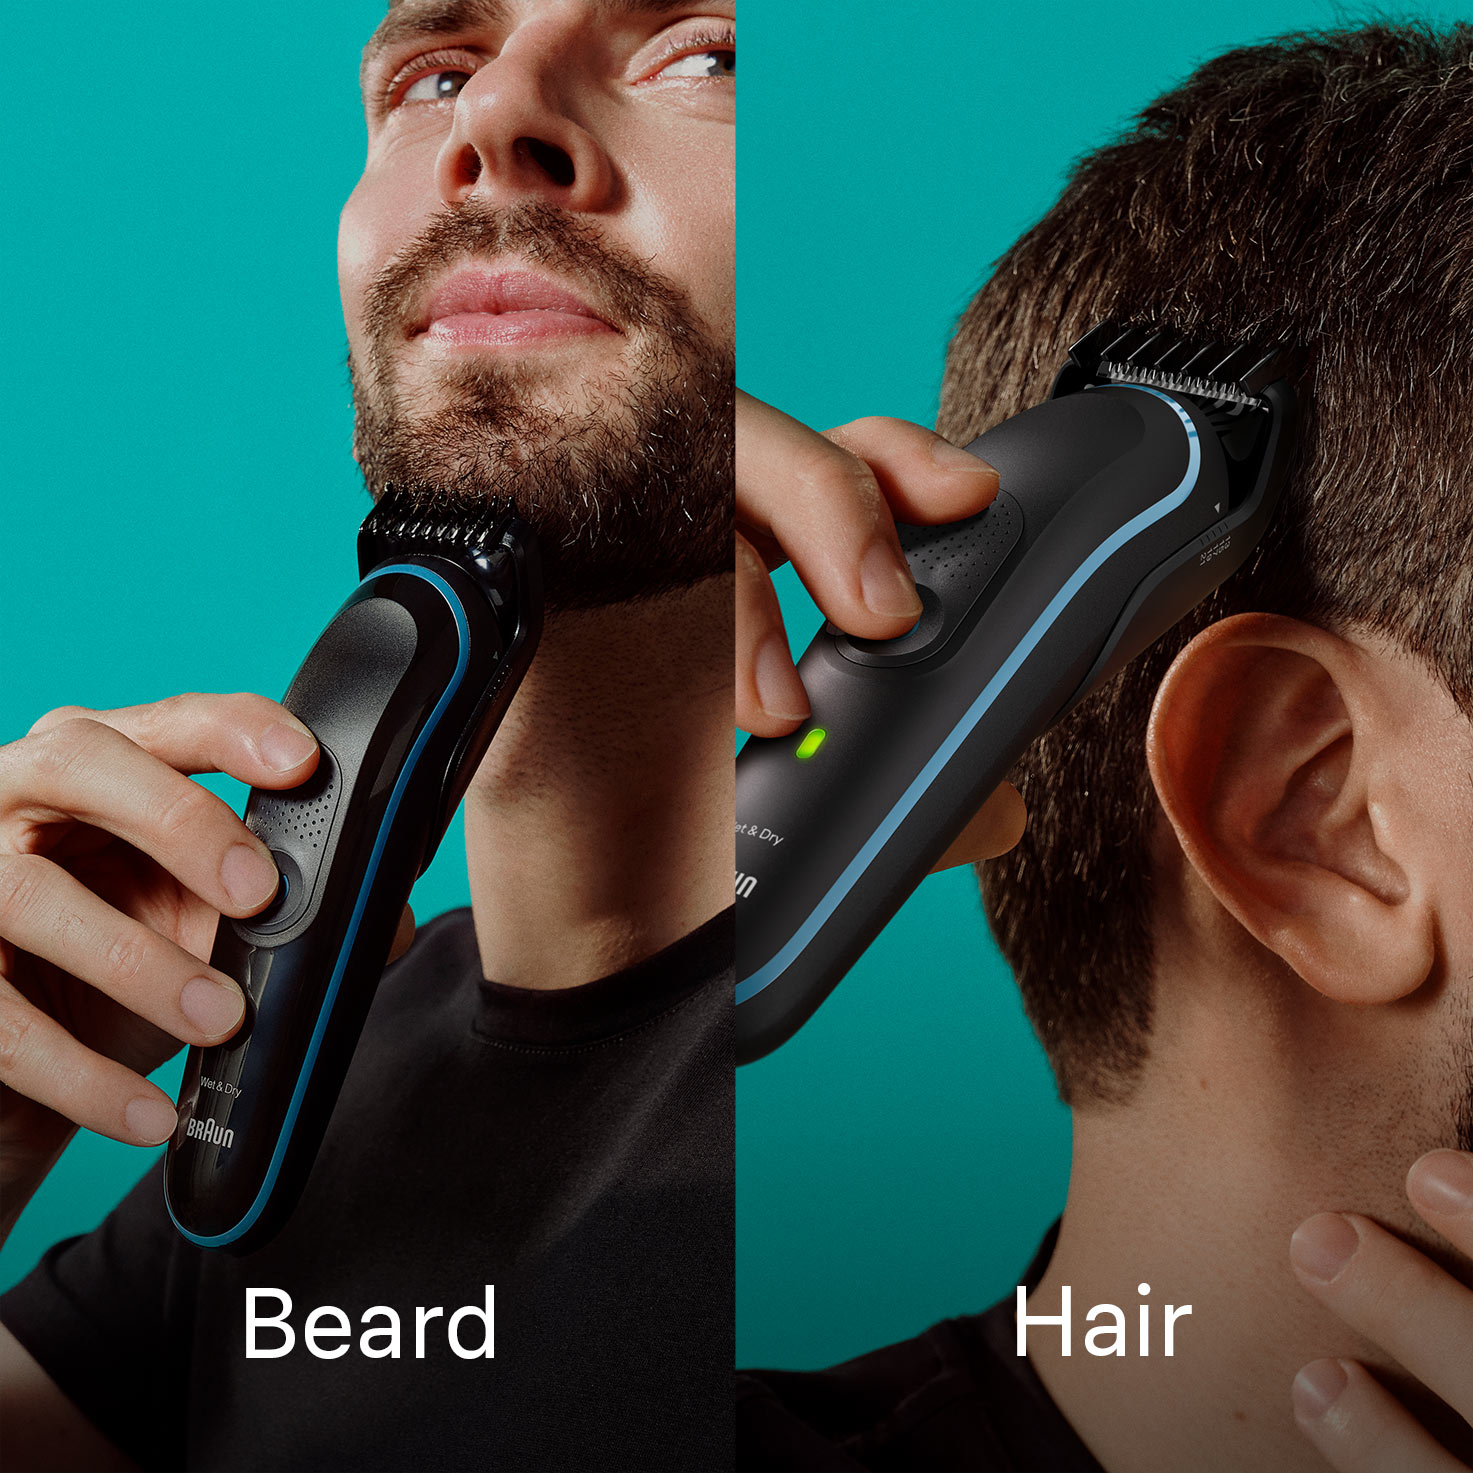 MGK 5411 : Braun's all in one male body grooming kit